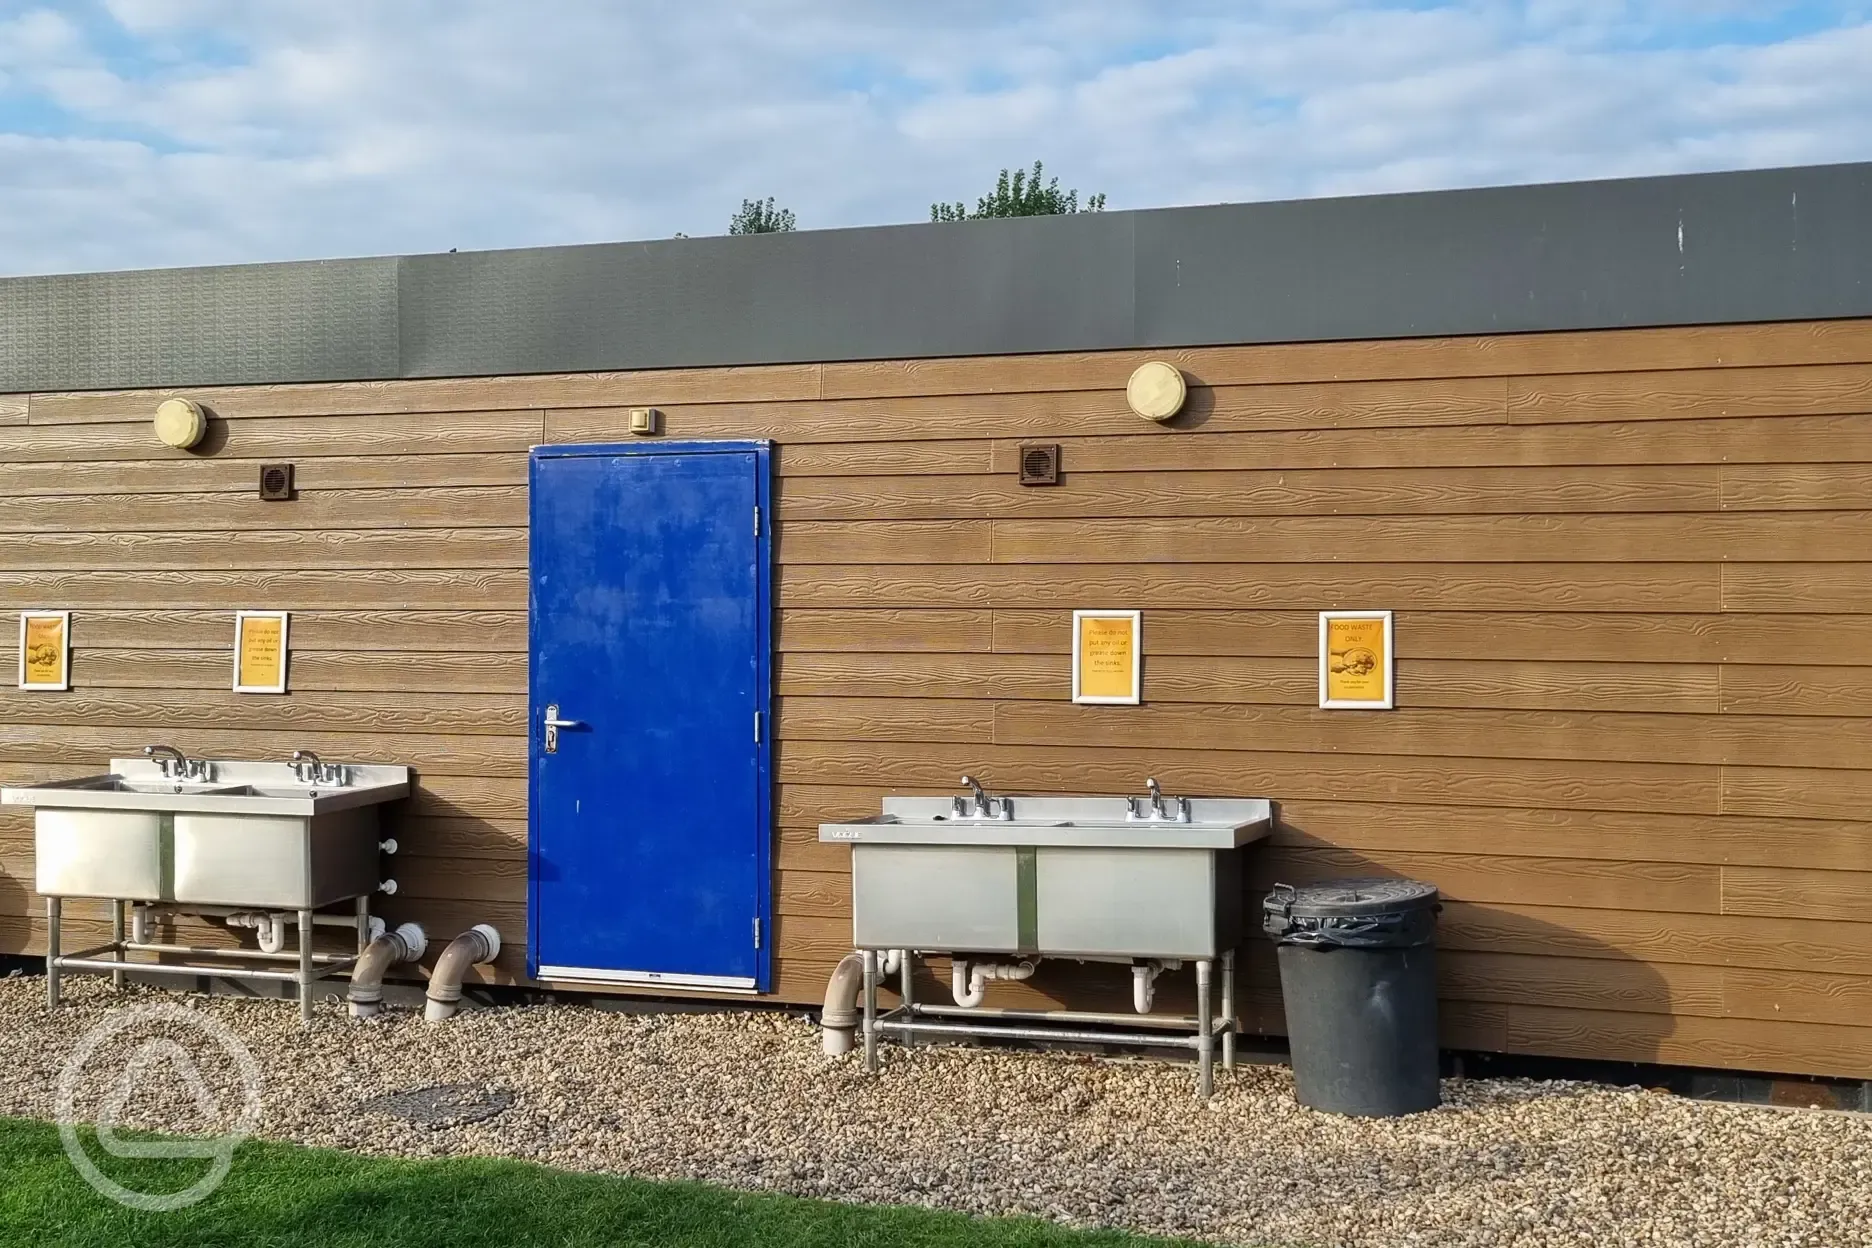 Facilities building with outdoor washing up sinks